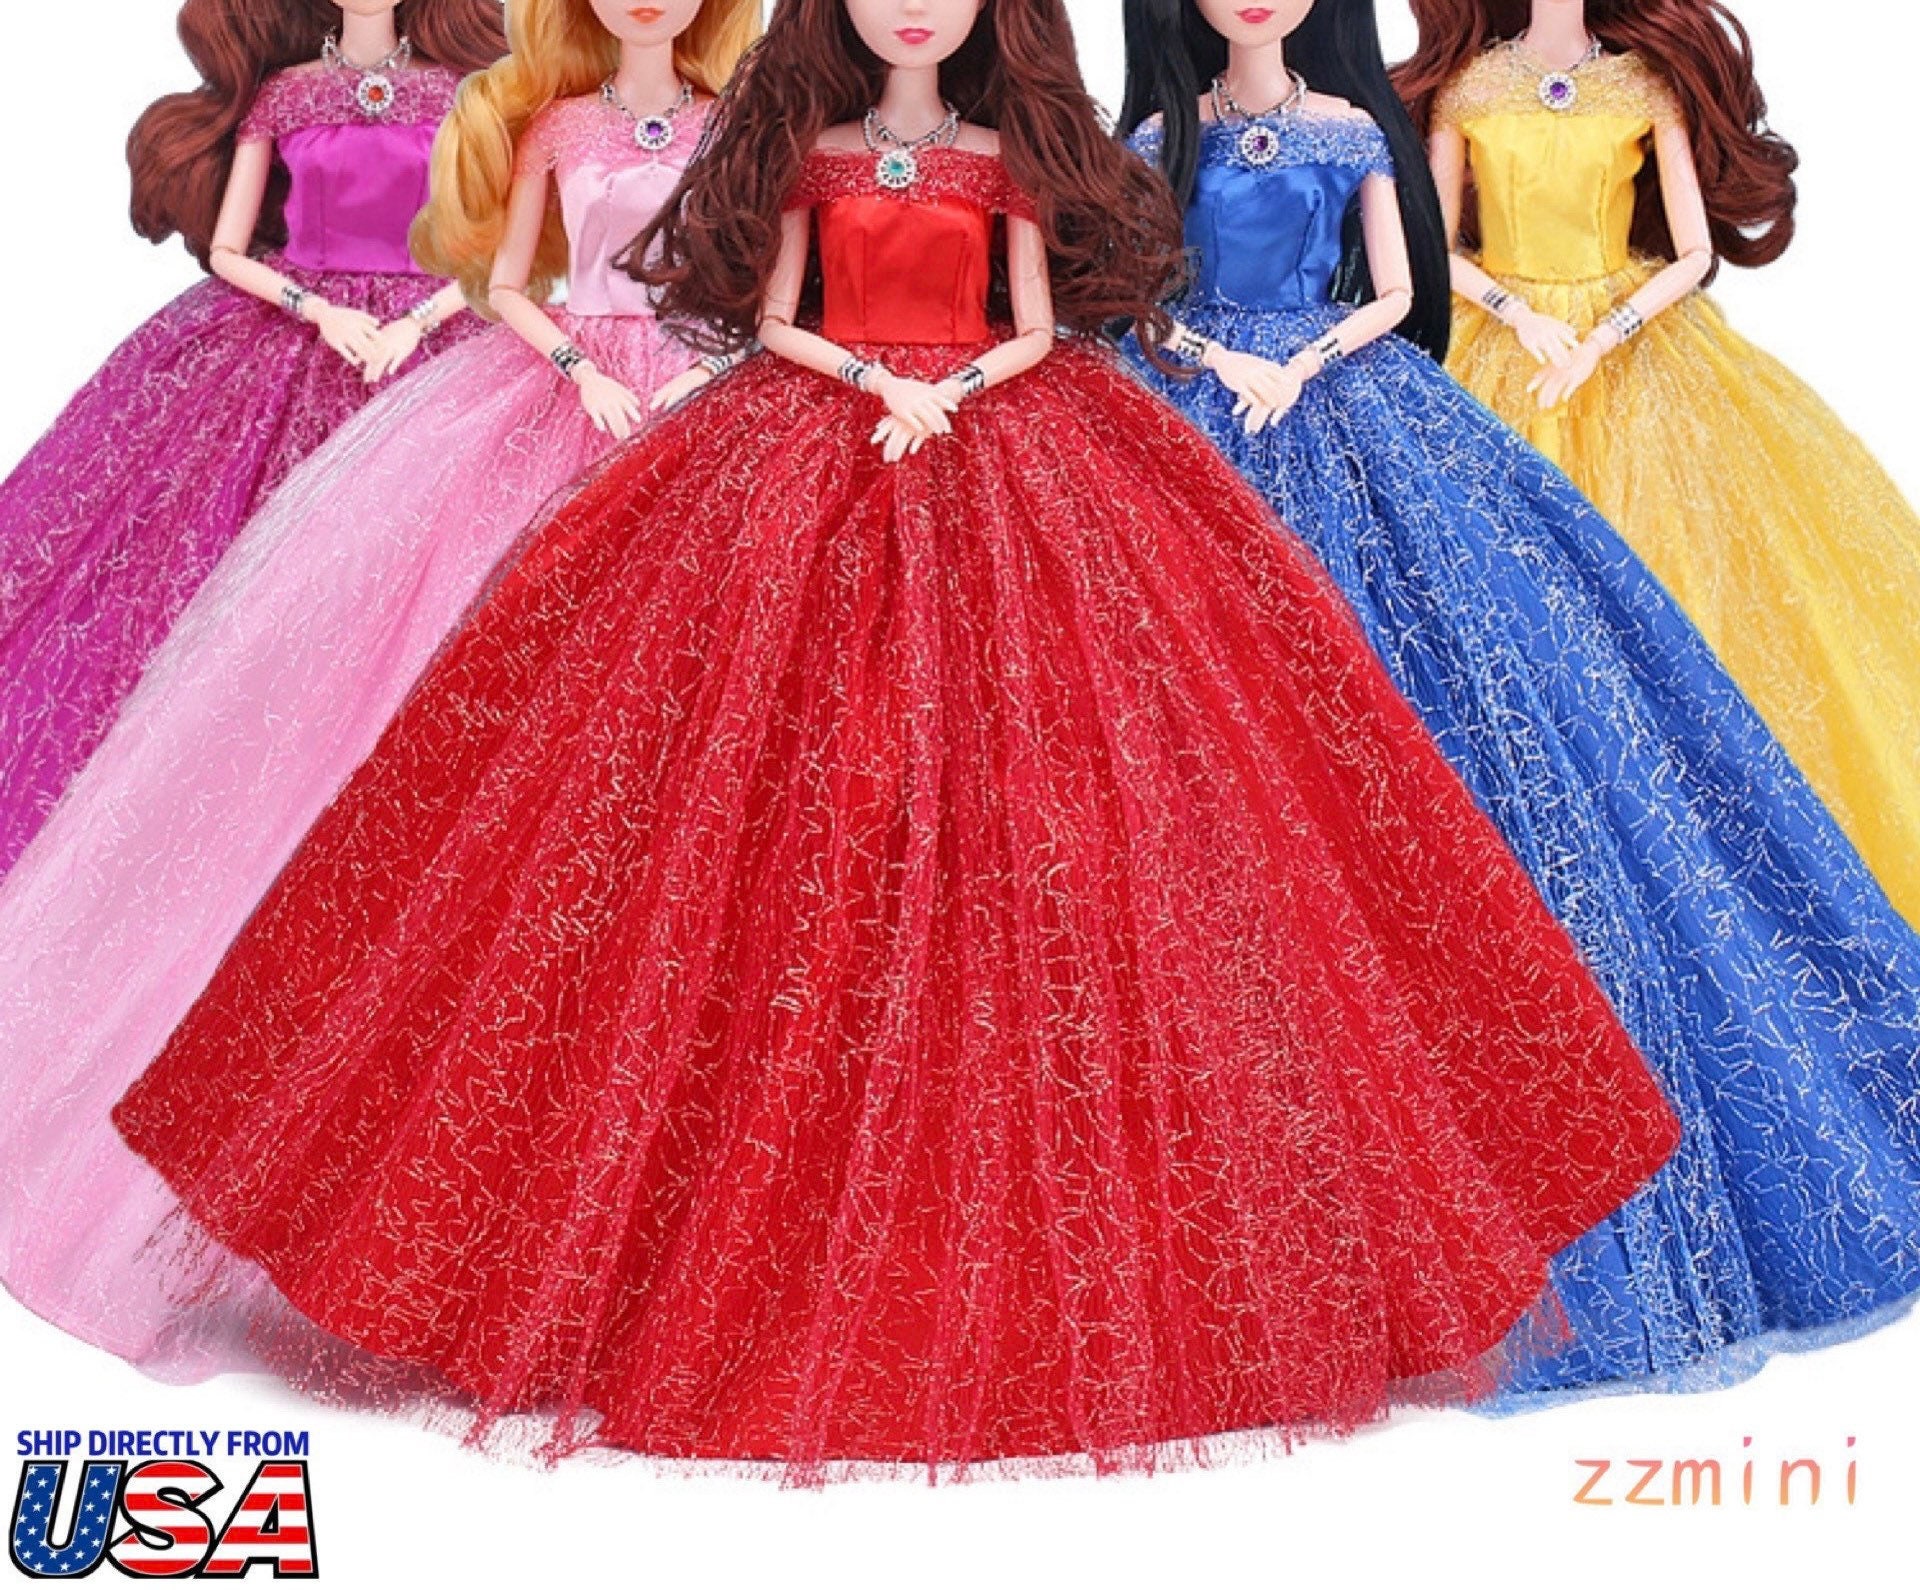 Amazon.com: Barbie Mattel Year 2007 Pink Label Collector Series 12 Inch  Doll - American Heart Association Go Red for Women (K7957) with Red Chiffon  Gown, Earrings and Rhinestone Brooch Accent : Toys & Games